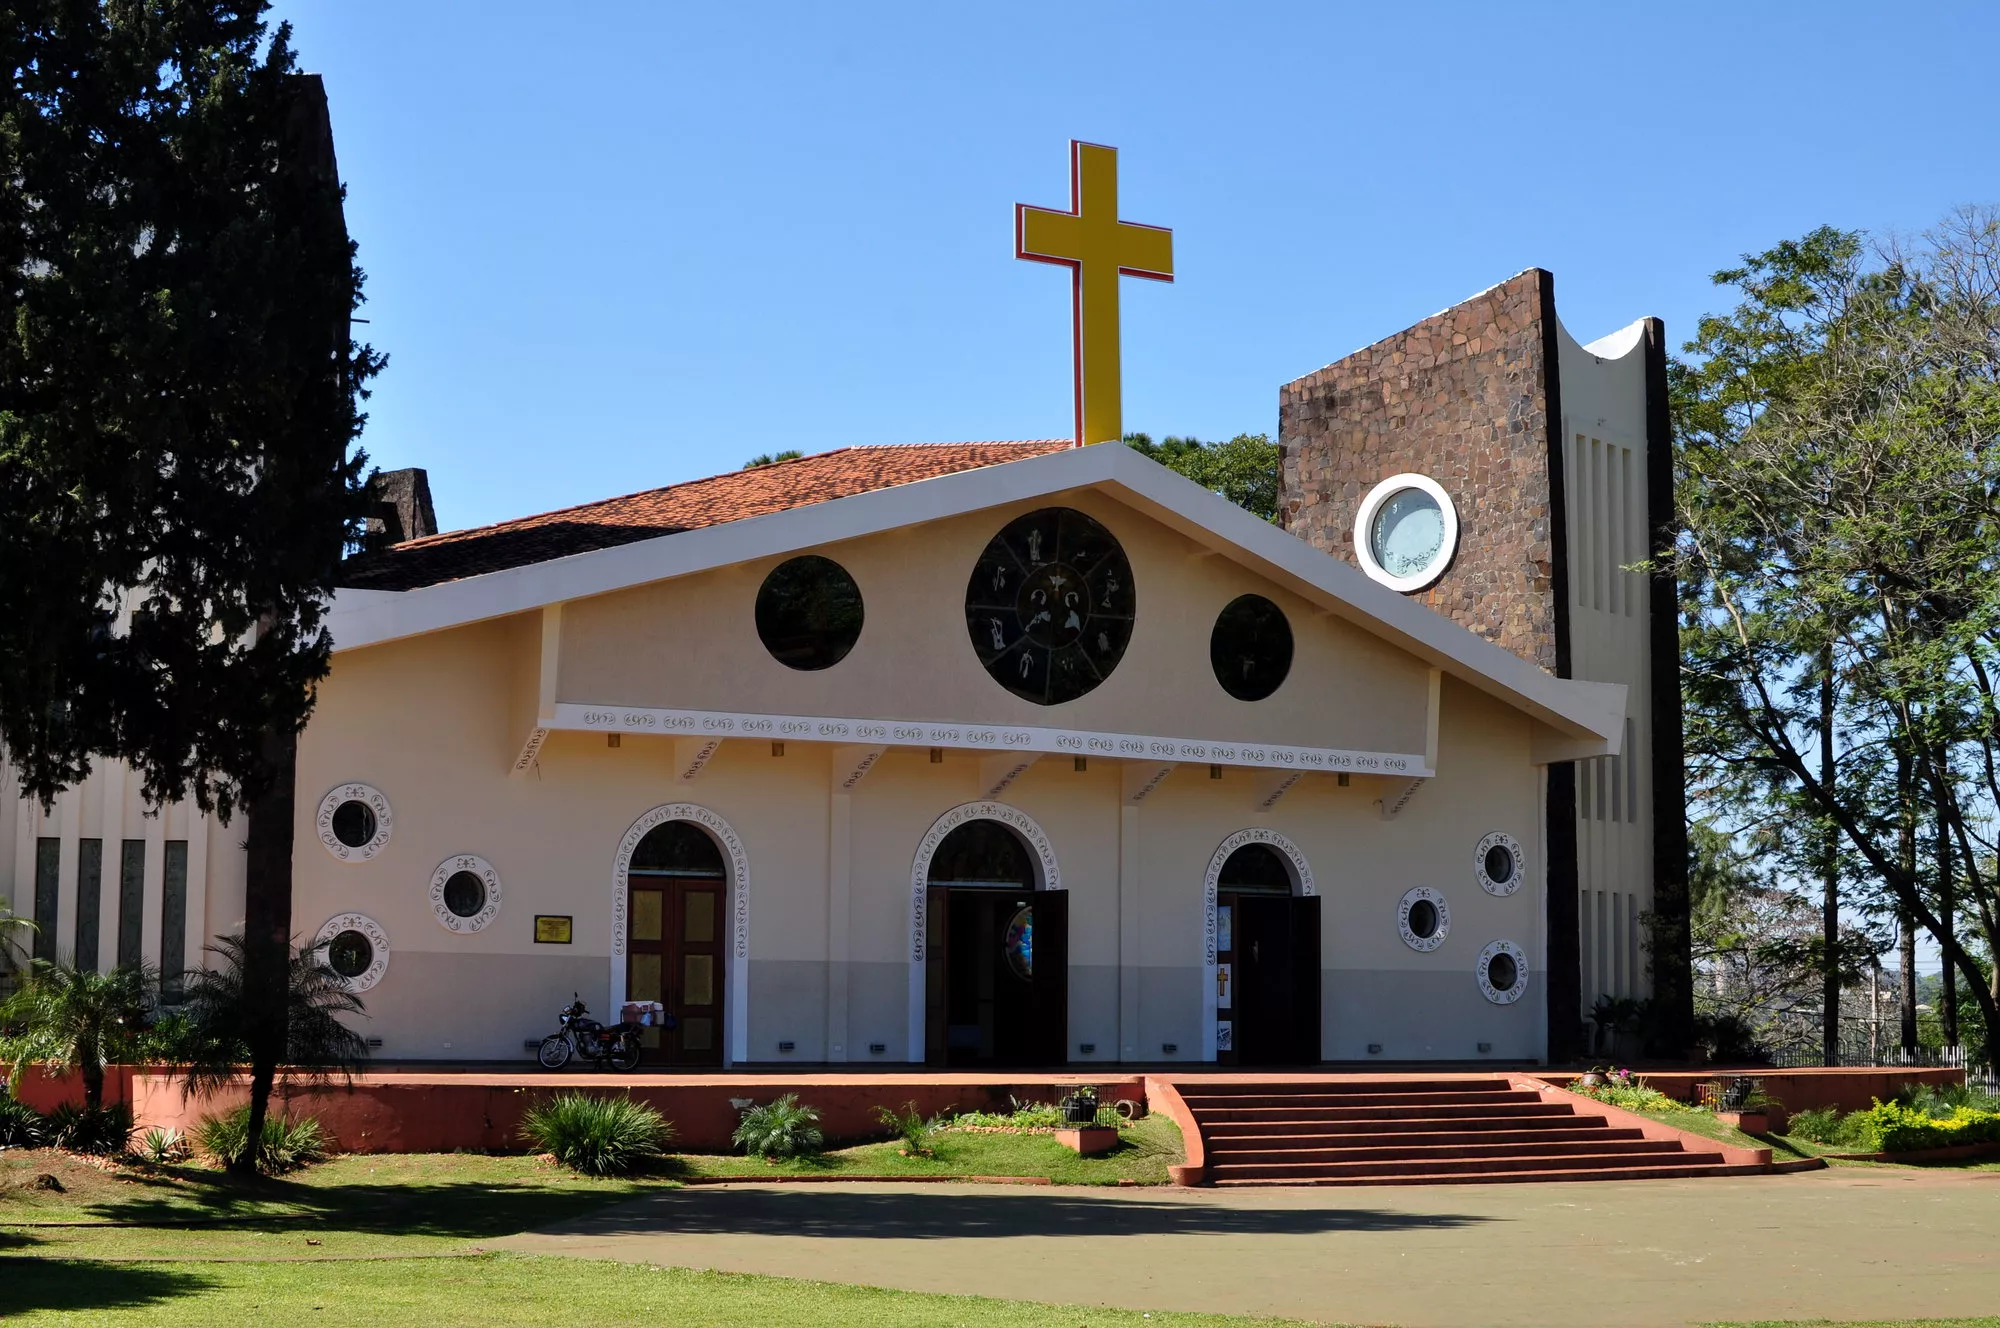 Catedral San Blas in Paraguay, South America | Architecture - Rated 3.8